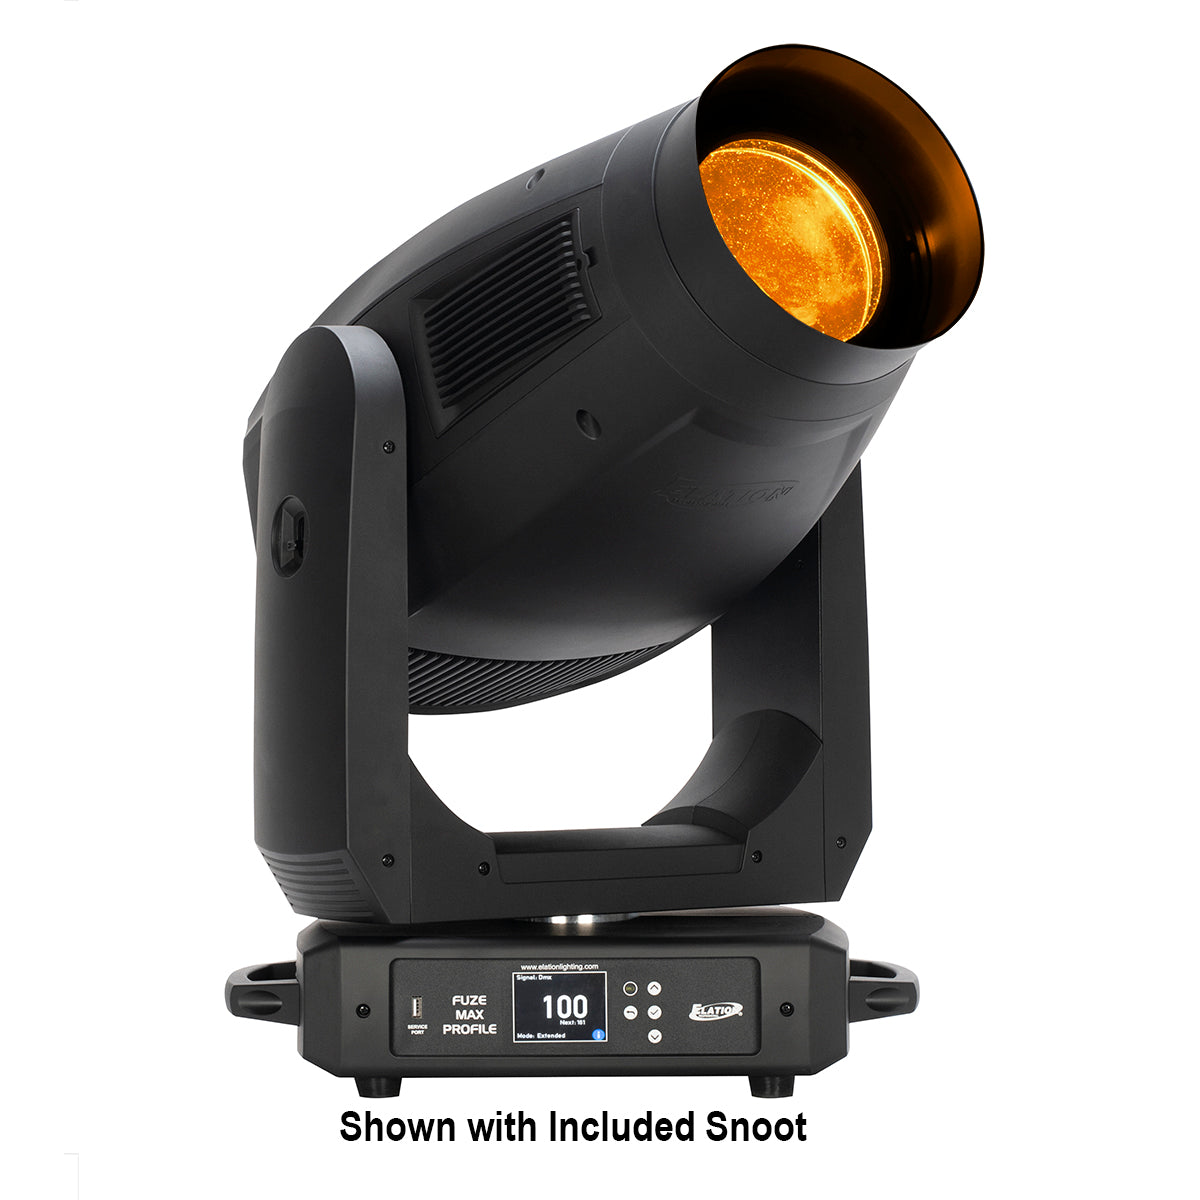 Elation FUZE MAX PROFILE - Automated Full Color LED Framing Fixture, shown with included snoot